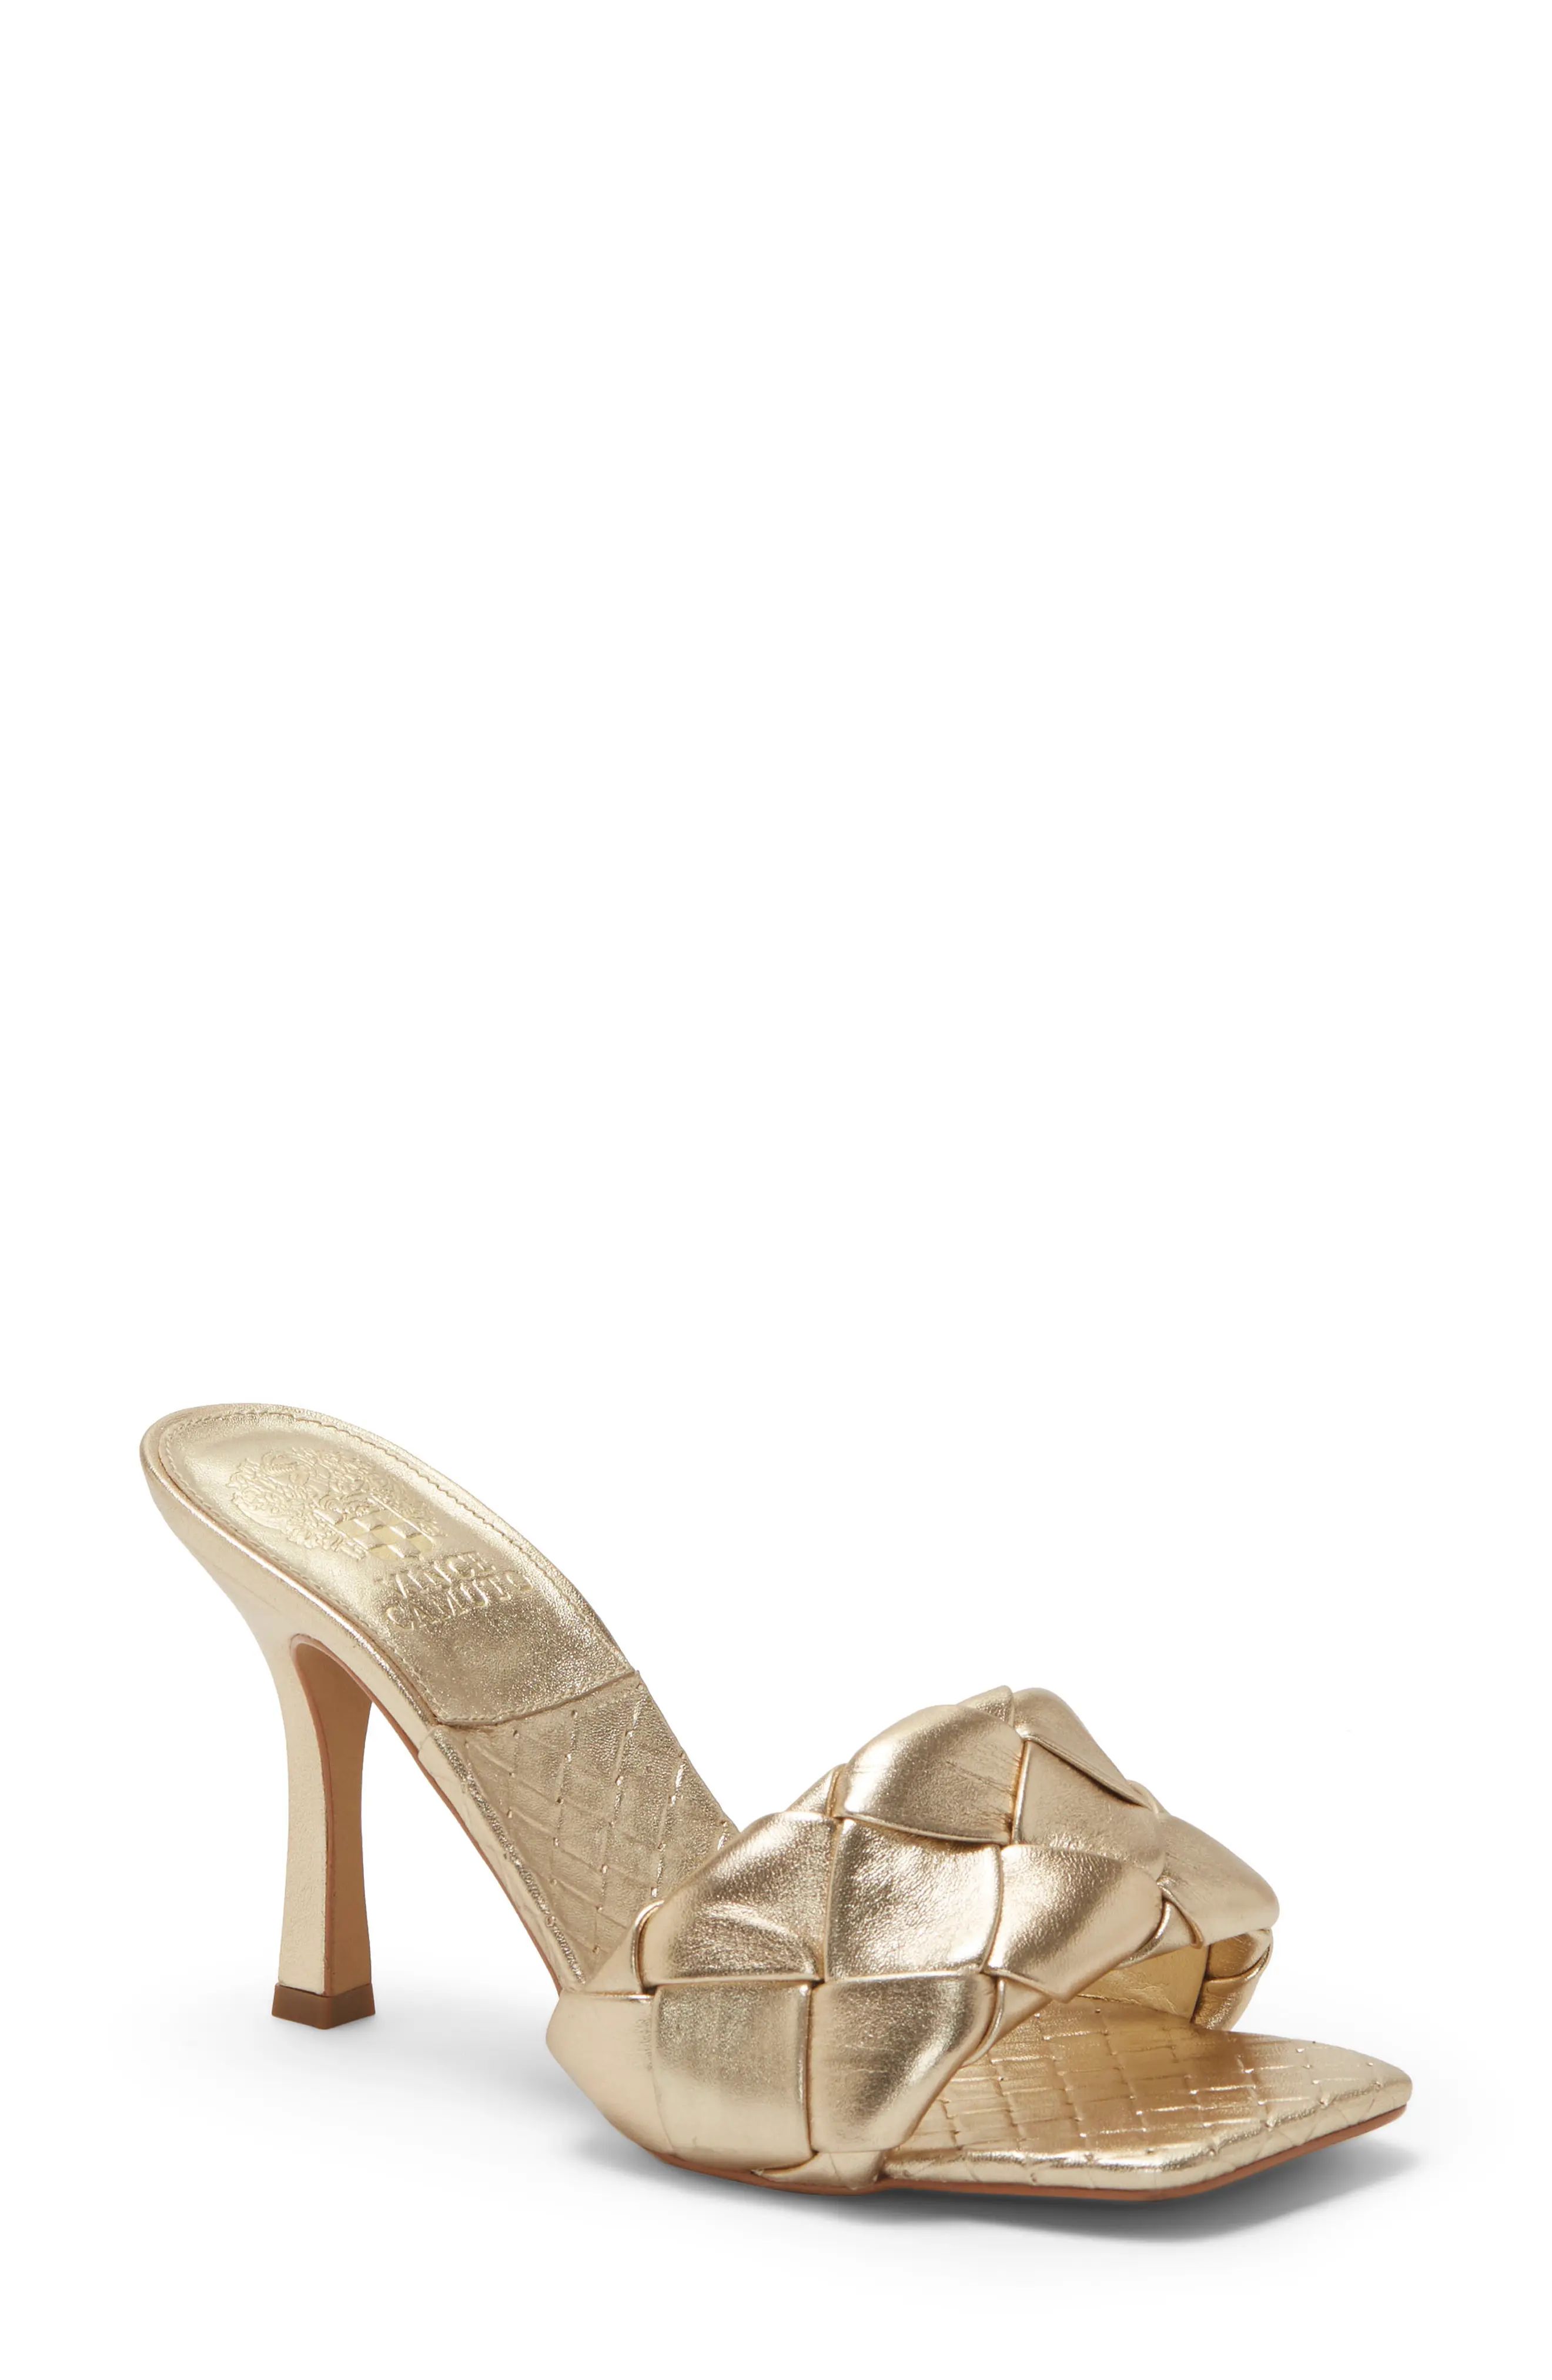 Vince Camuto Brelanie Sandal in Gold Leather at Nordstrom, Size 8 | Nordstrom